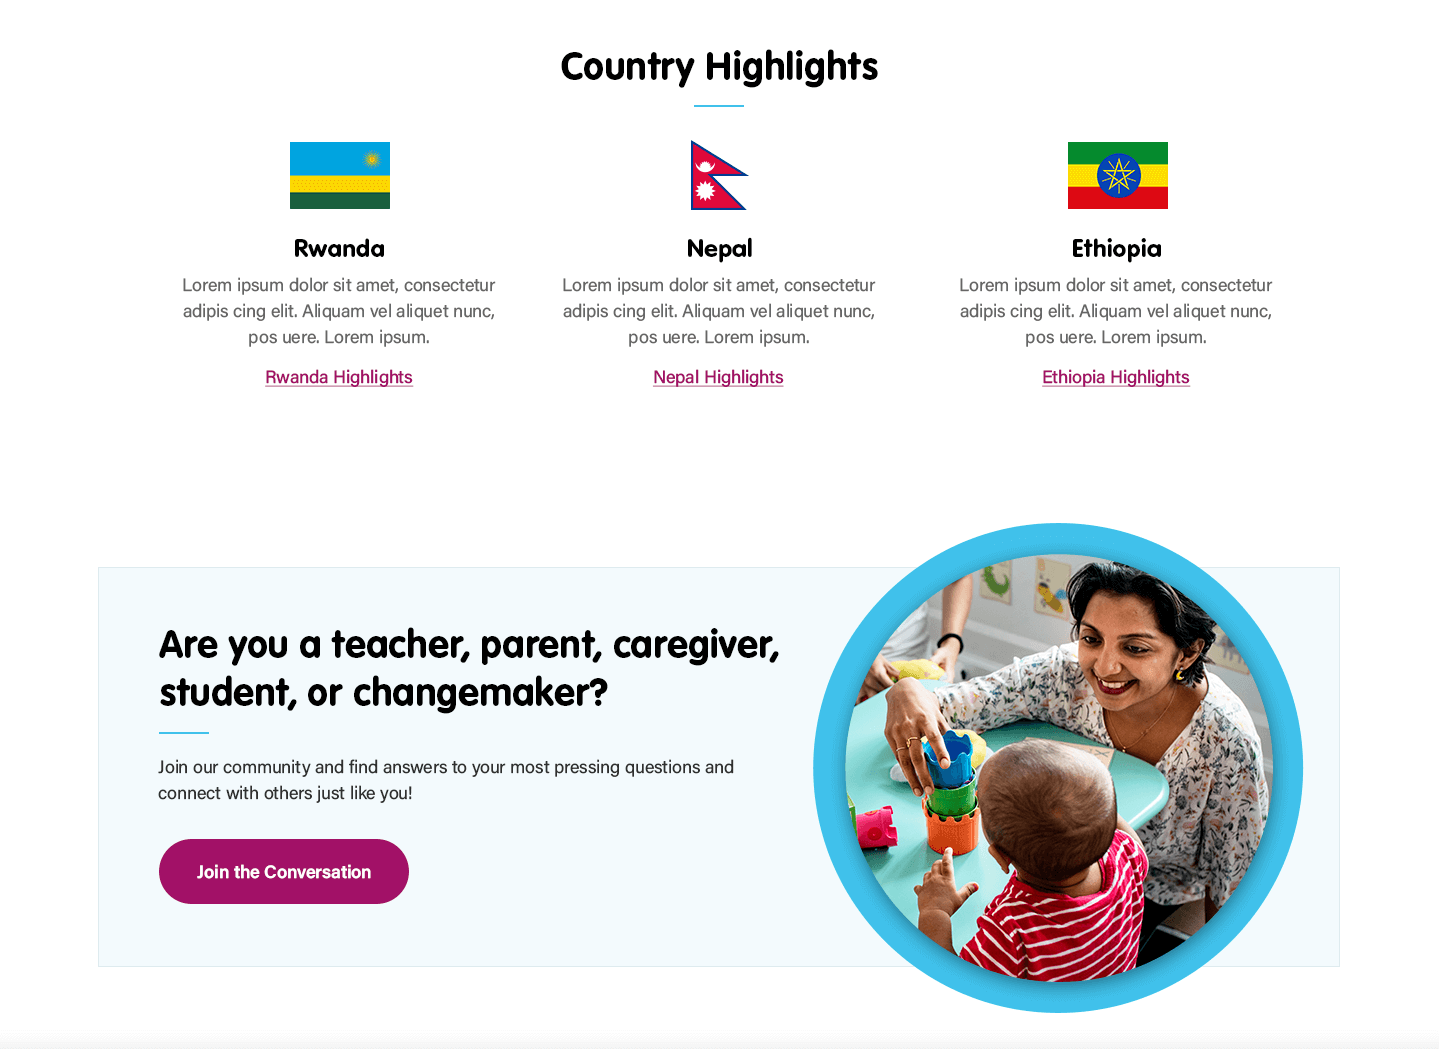 A screenshot of the IEI website featuring country highlights and engaging CTAs